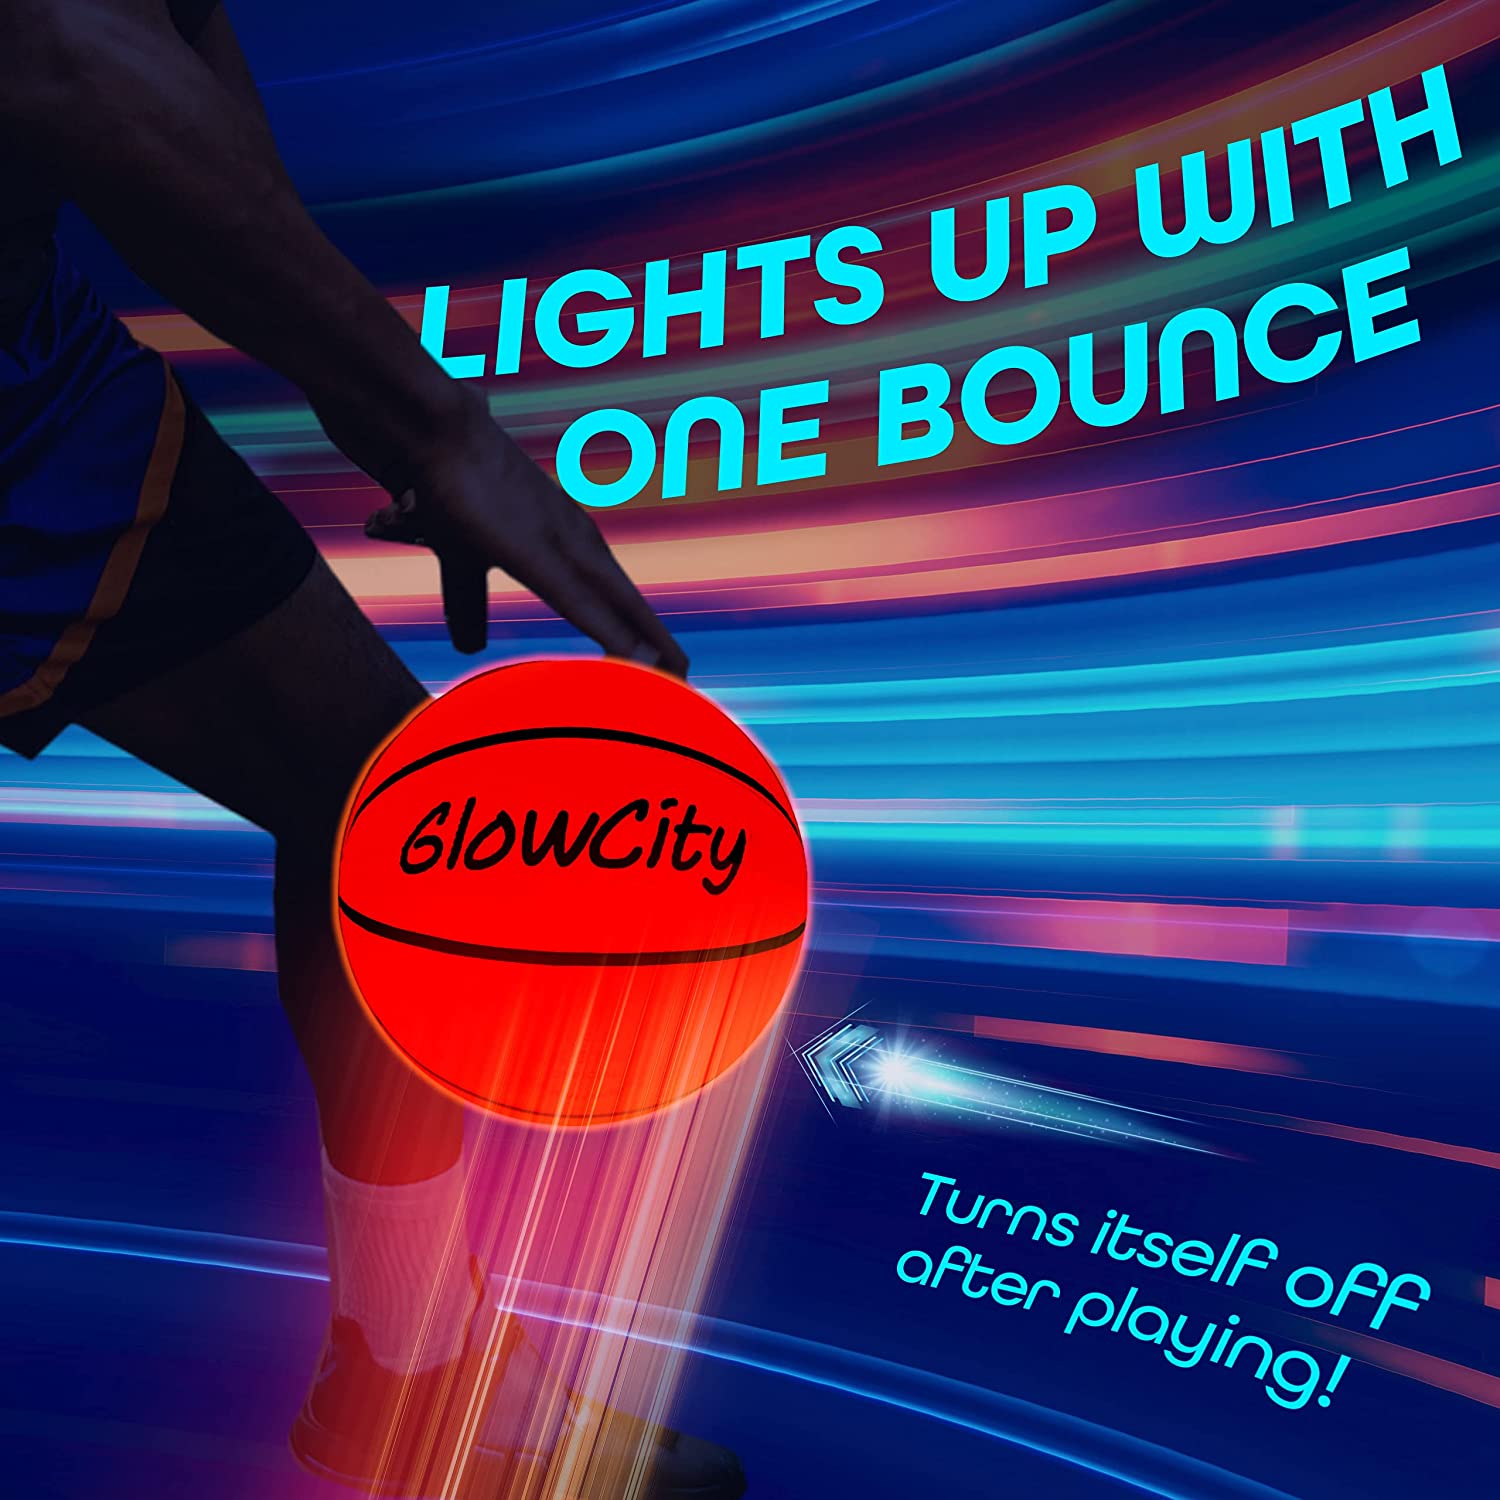 A person is bouncing a Glowcity glow in the dark basketball which is lit up.